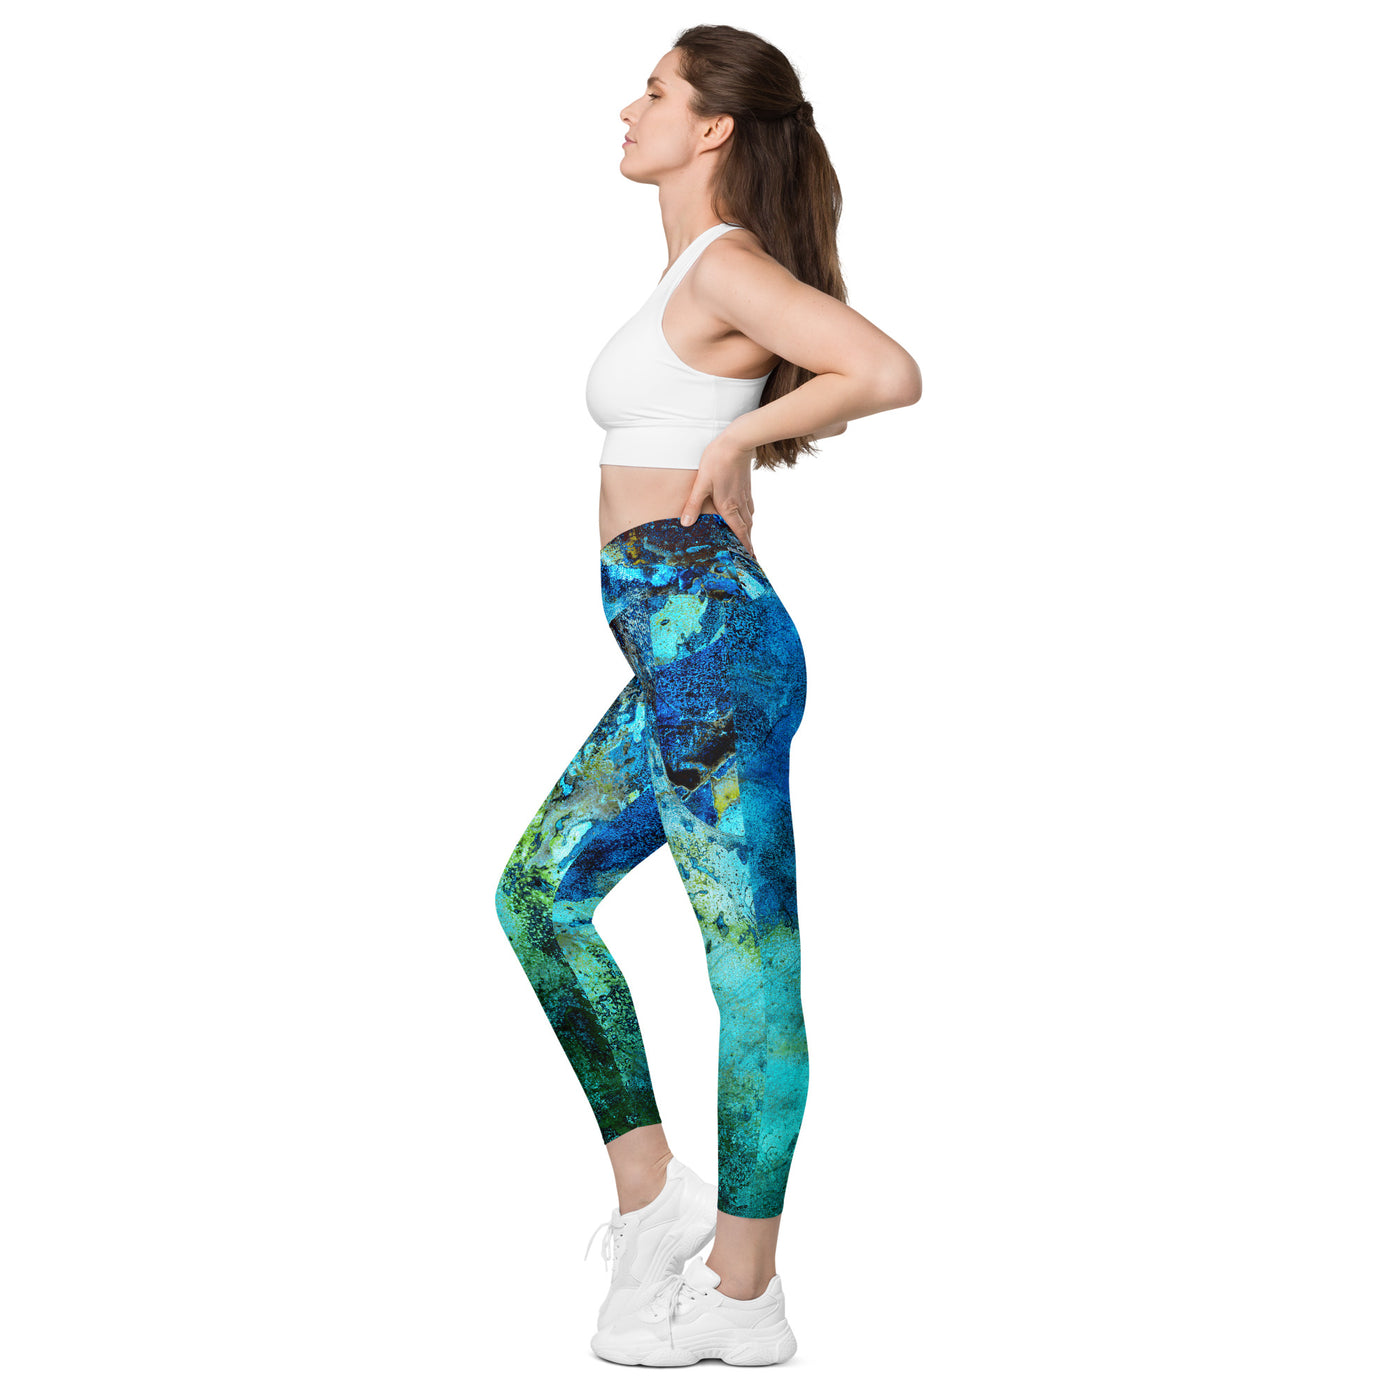 Painter's Dream - Crossover leggings with pockets